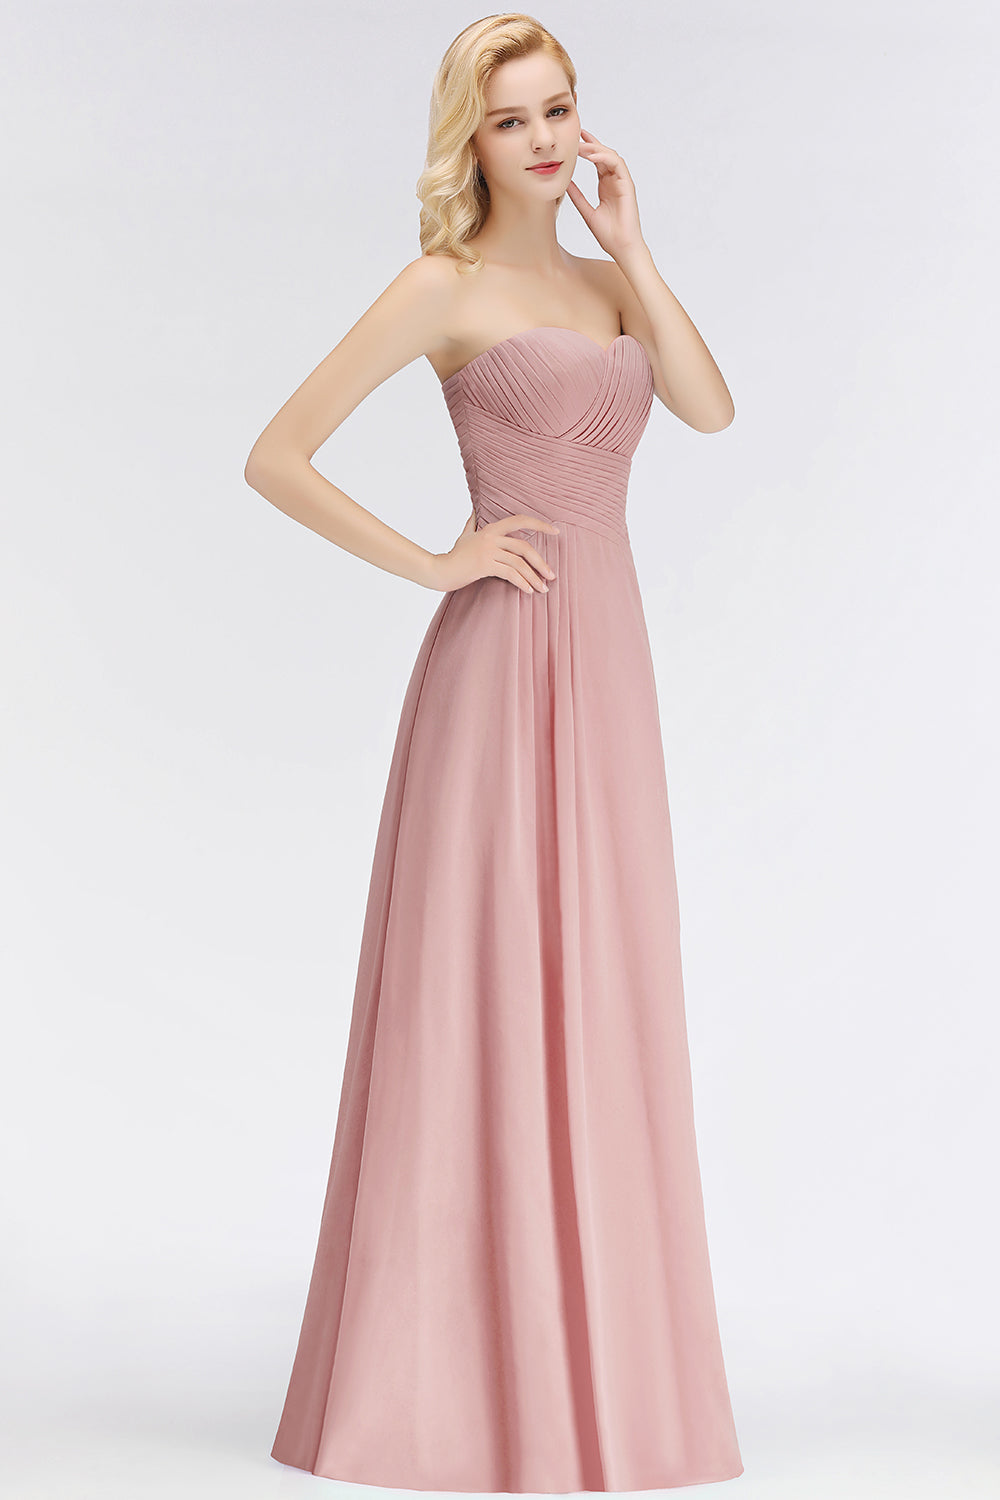 Gorgeous Sweetheart Ruched Long Bridesmaid Dress Dusty Rose Chiffon Strapless Maid of Honor Dress-27dress